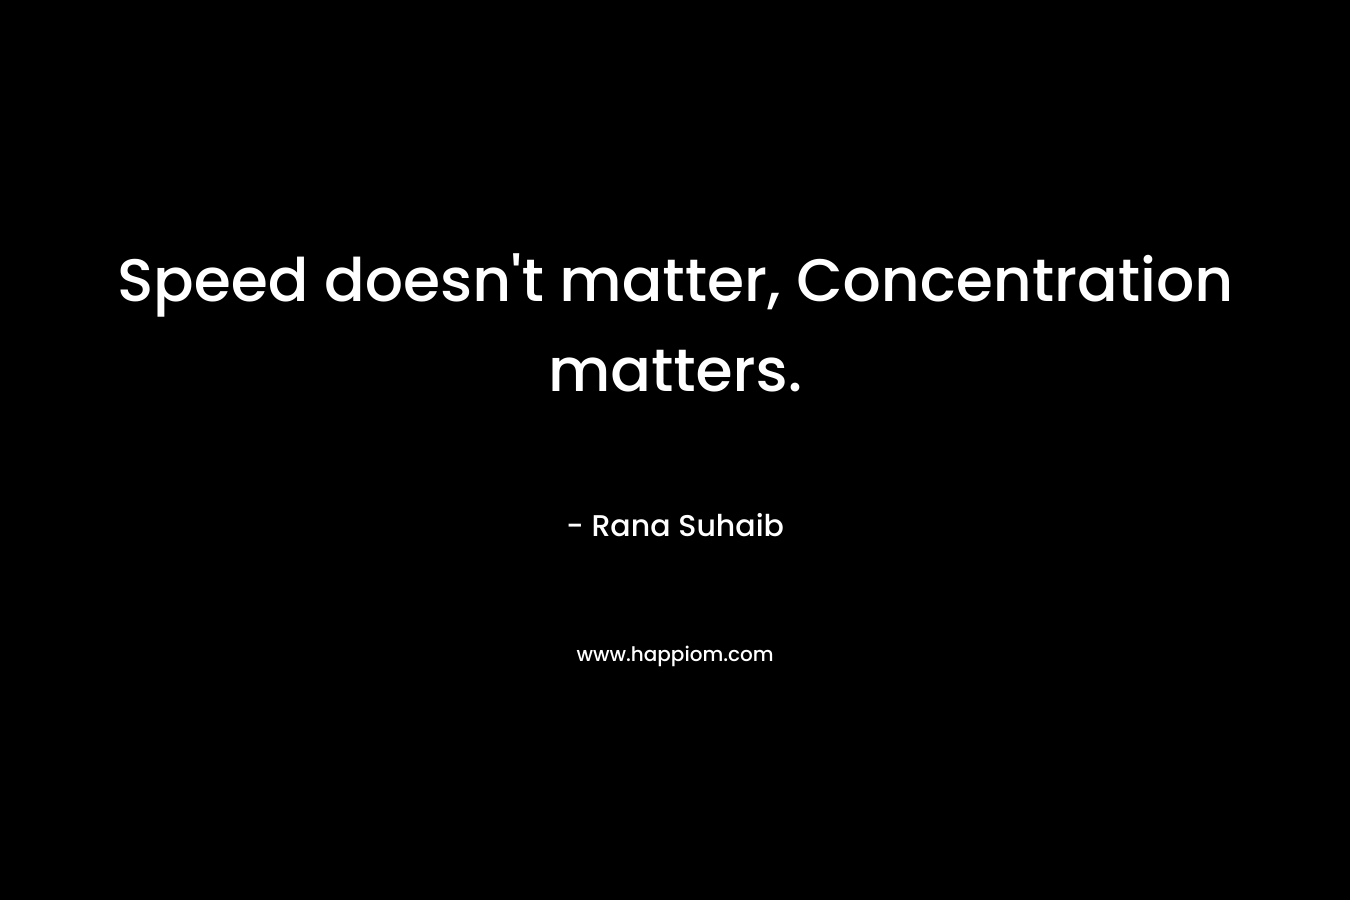 Speed doesn’t matter, Concentration matters. – Rana Suhaib